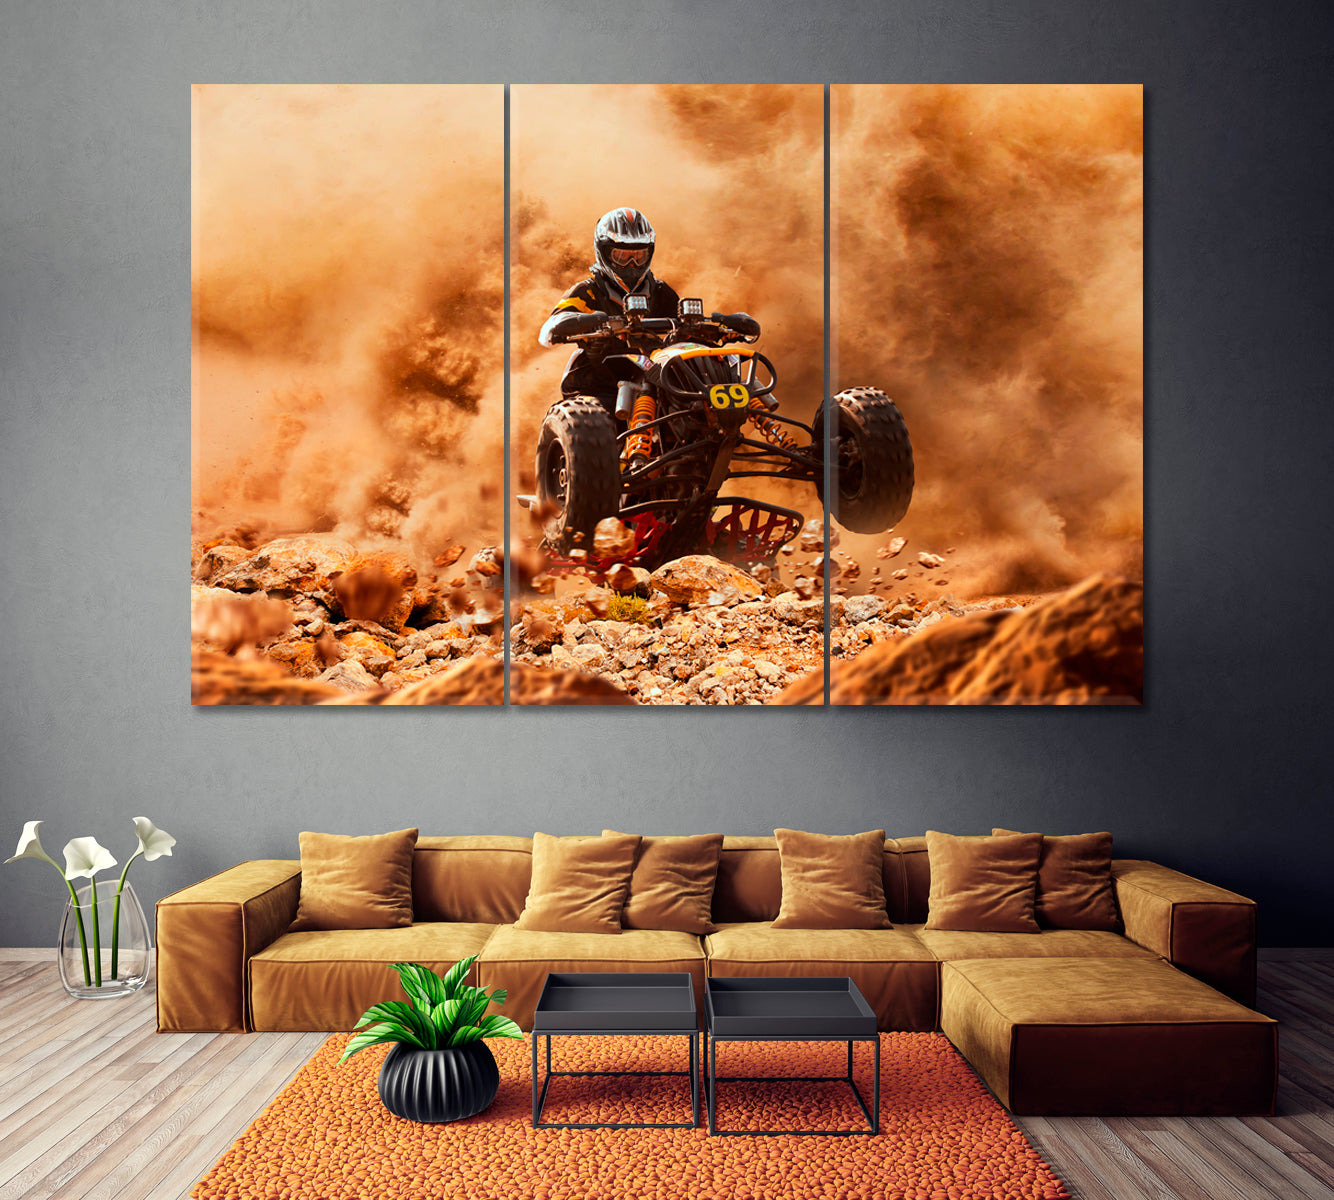 ATV Rider in Cloud of Dust Canvas Print ArtLexy 3 Panels 36"x24" inches 